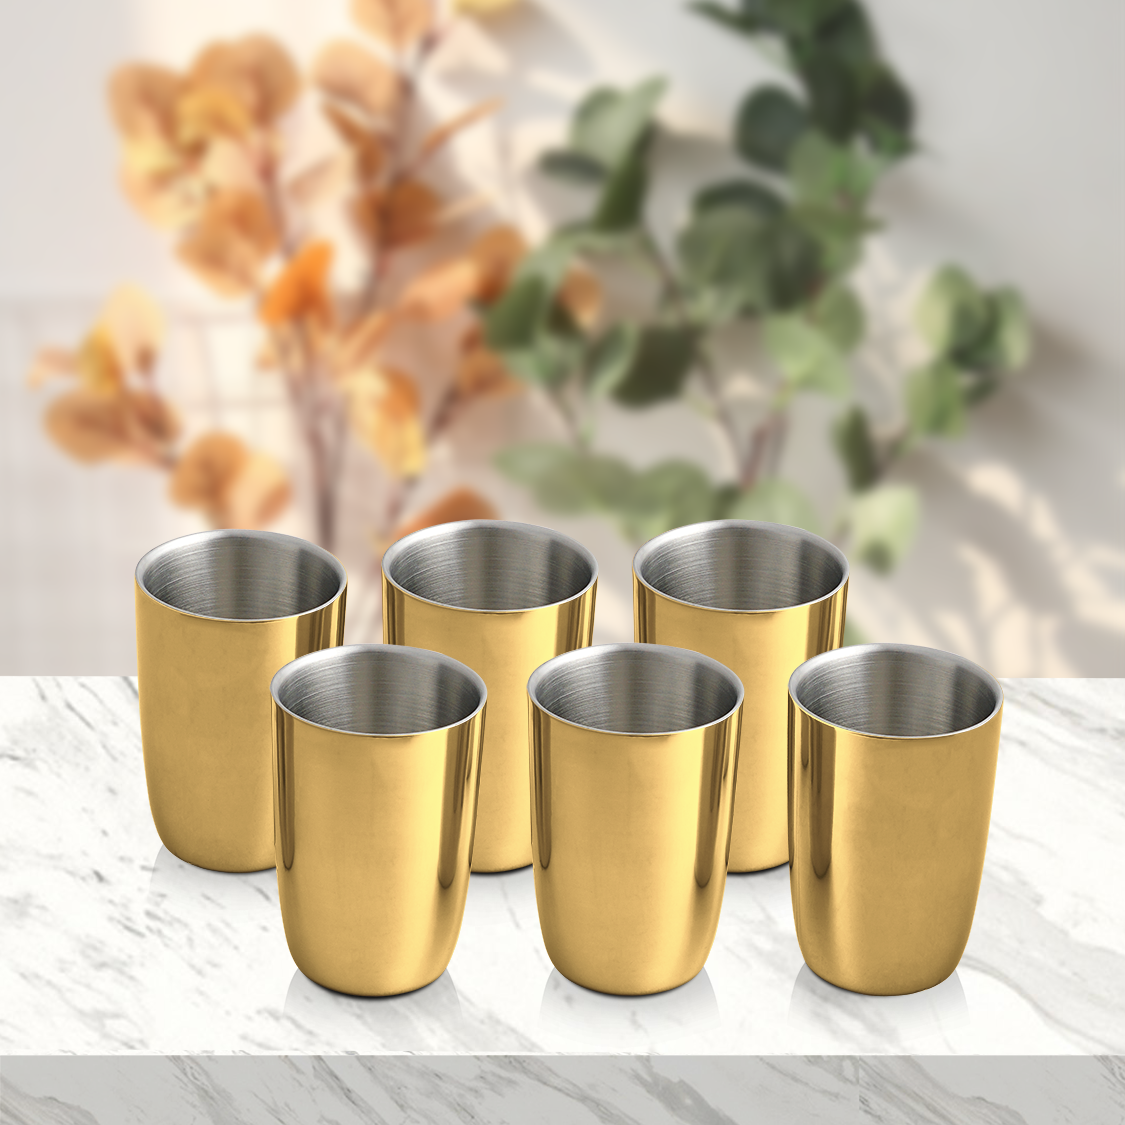 Stainless Steel 6 PCS Double Wall Glass with Gold PVD Coating Nikki